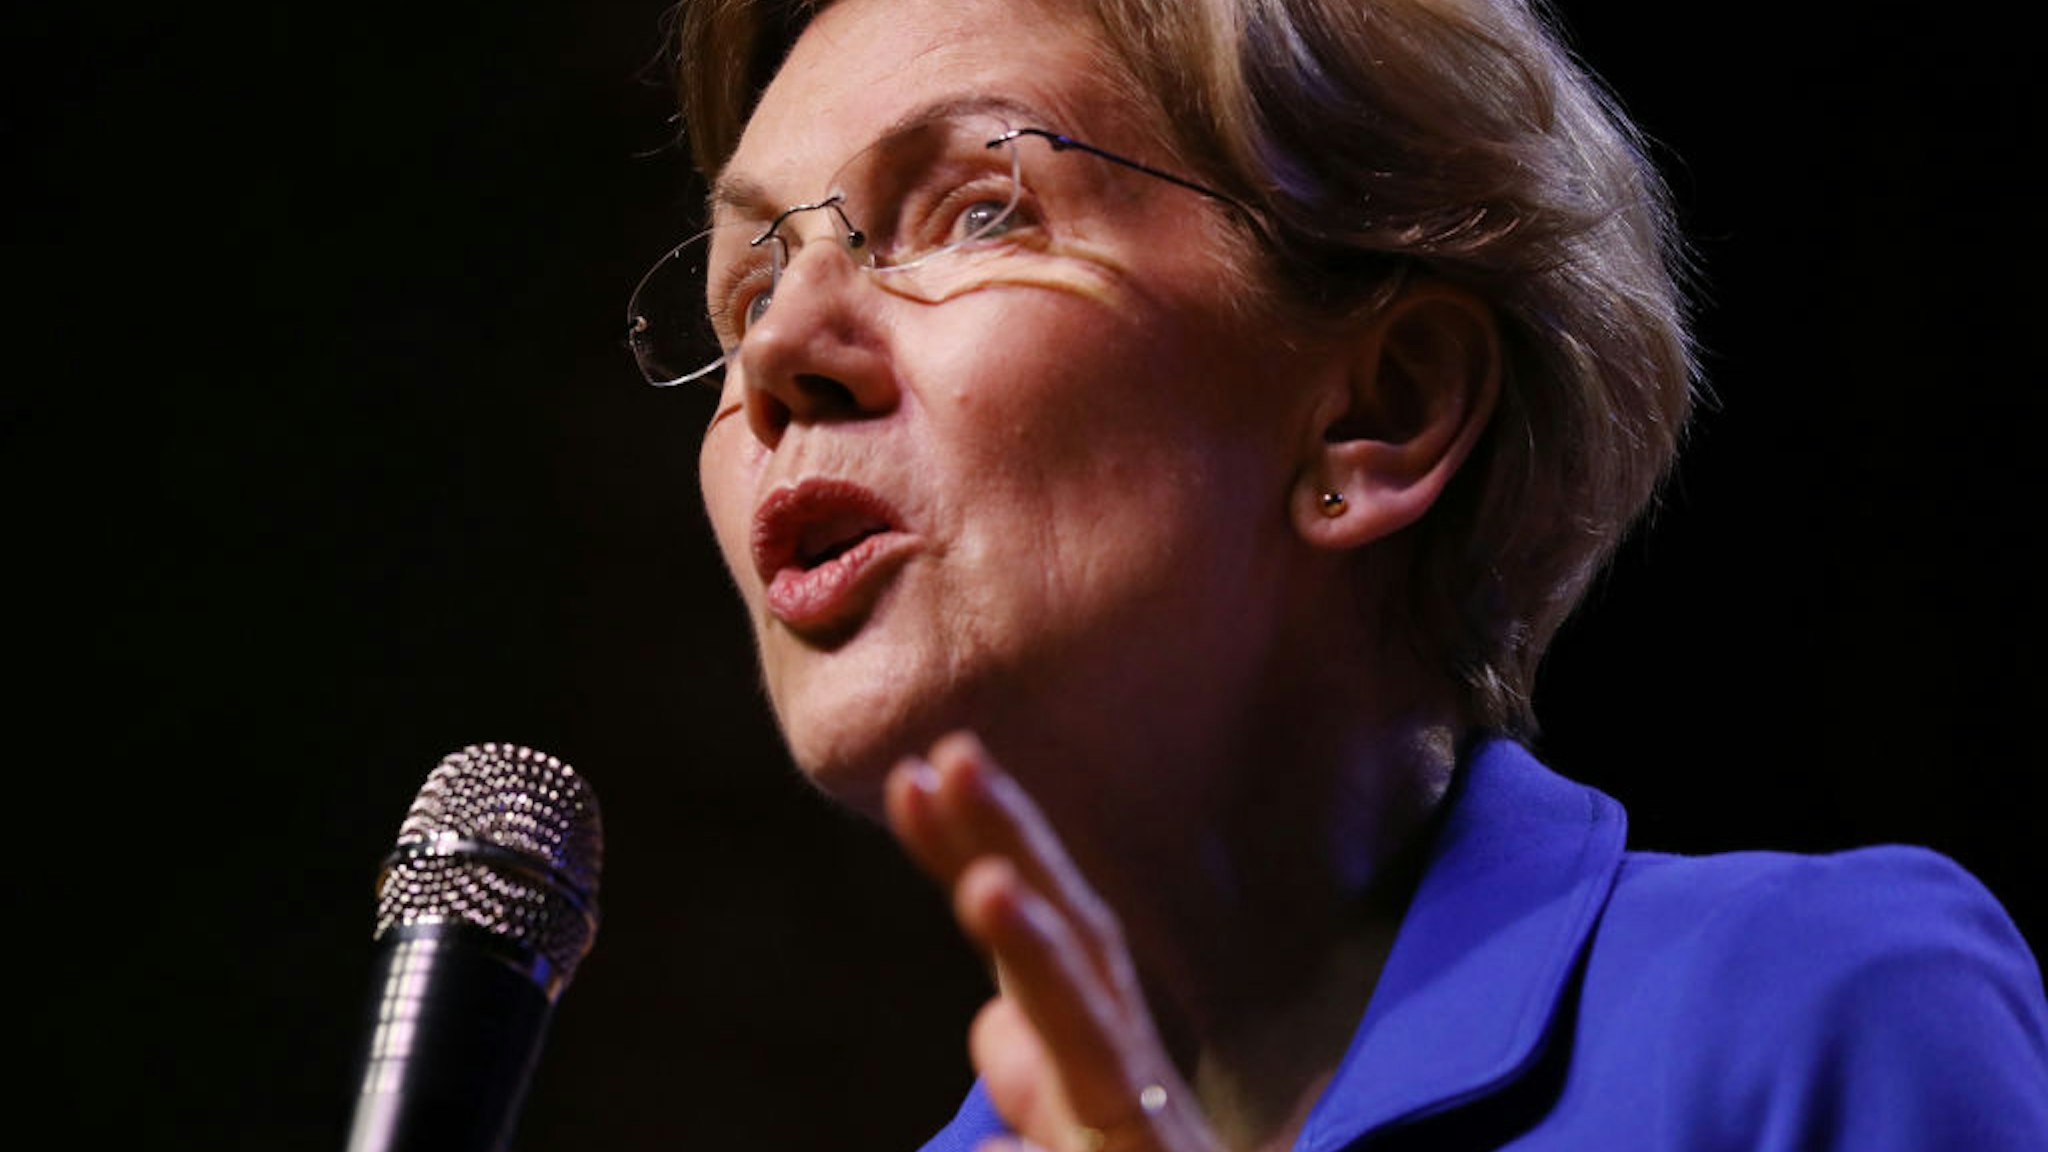 Democratic presidential candidate, Senator Elizabeth Warren (D-MA) speaks at a Get Out the Vote Rally at South Carolina State University ahead of South Carolina's primary on February 26, 2020 in Orangeburg, South Carolina.